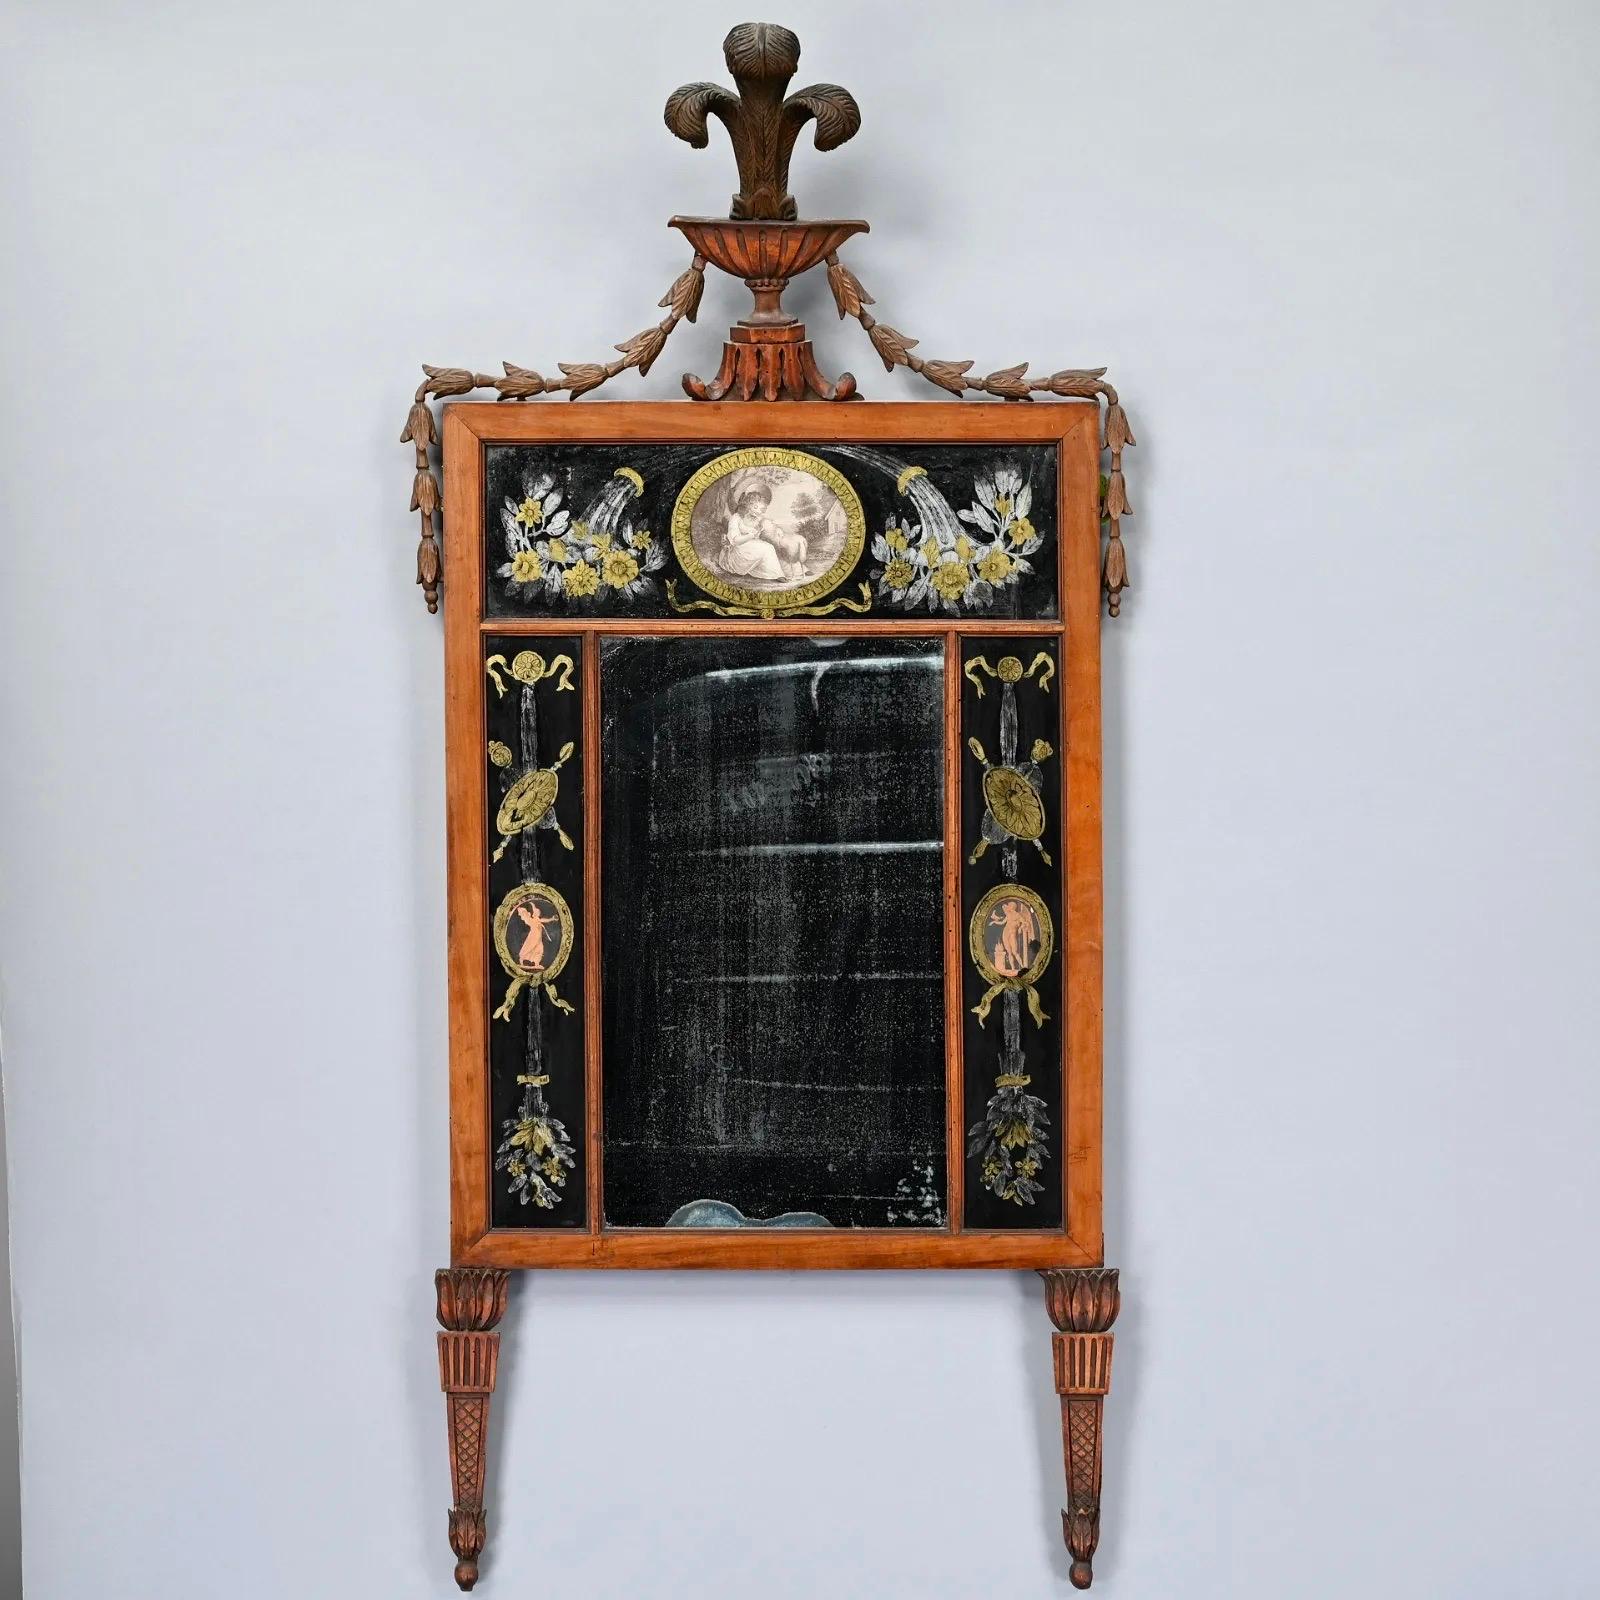 Early Nineteenth Century George III or Regency Eglomise Mirror of Carved Beechwood. The rectangular mirror plate flanked by eglomise panels of tassels, each hung with medallions of trophies and classical figures, surmounted by an eglomise panel